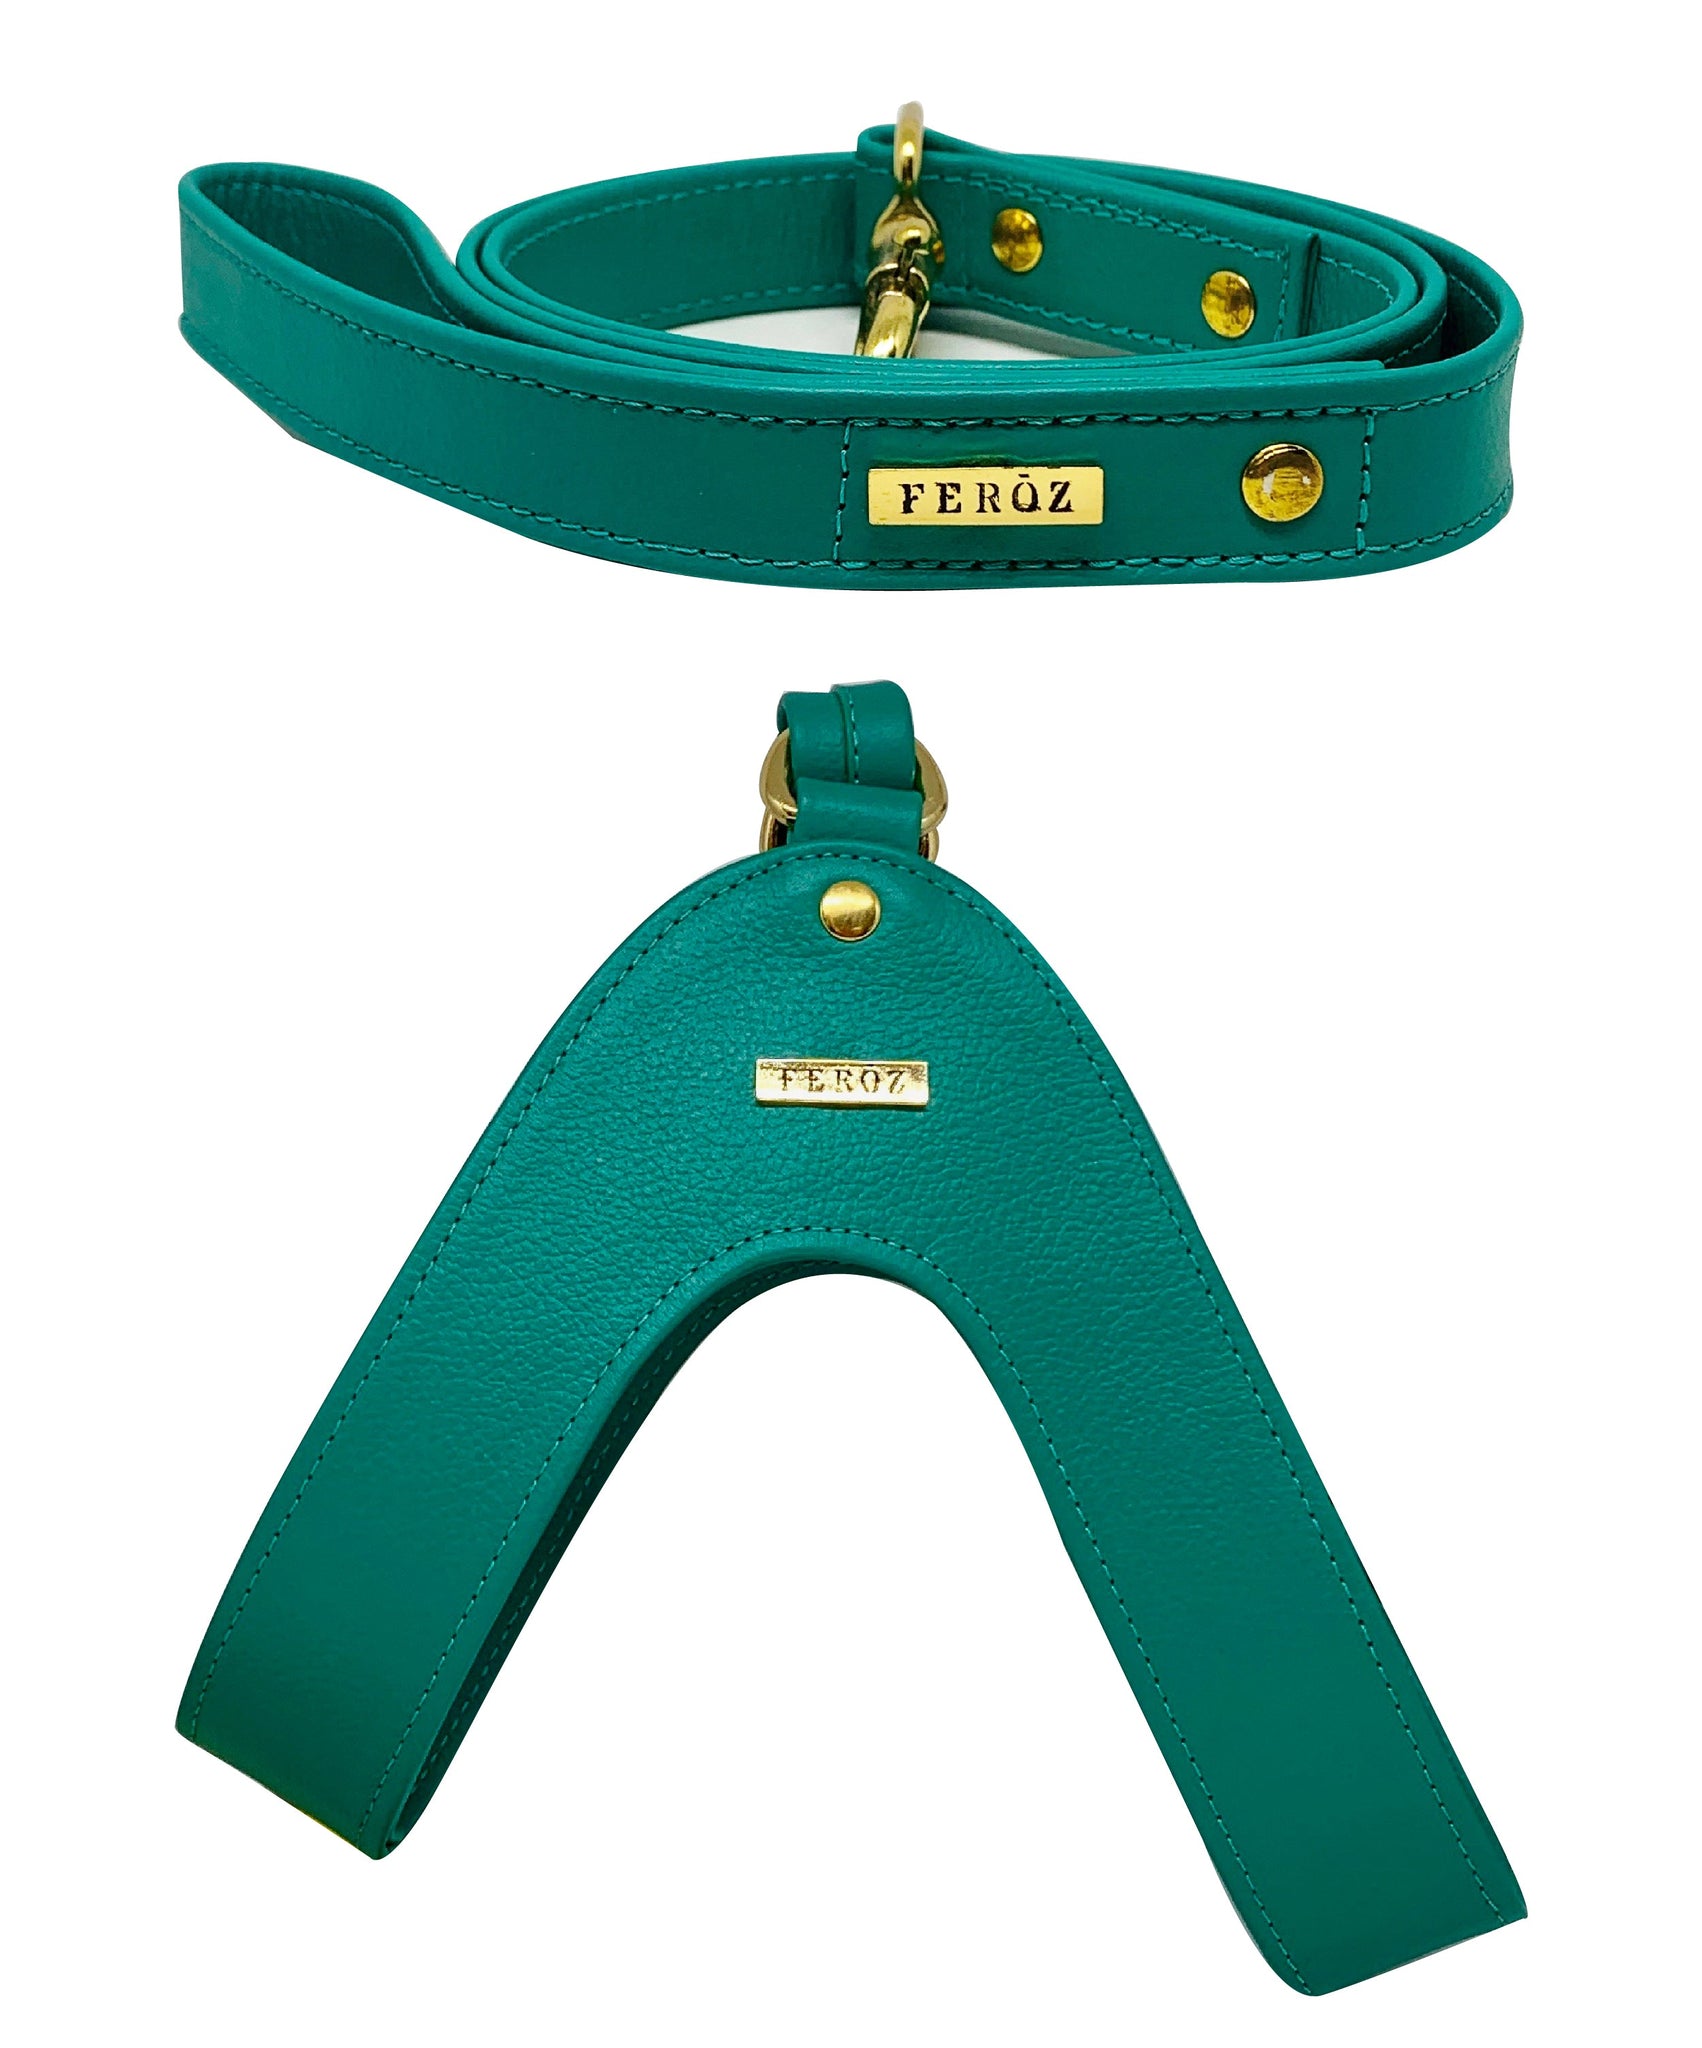 Turquoise leather dog harness